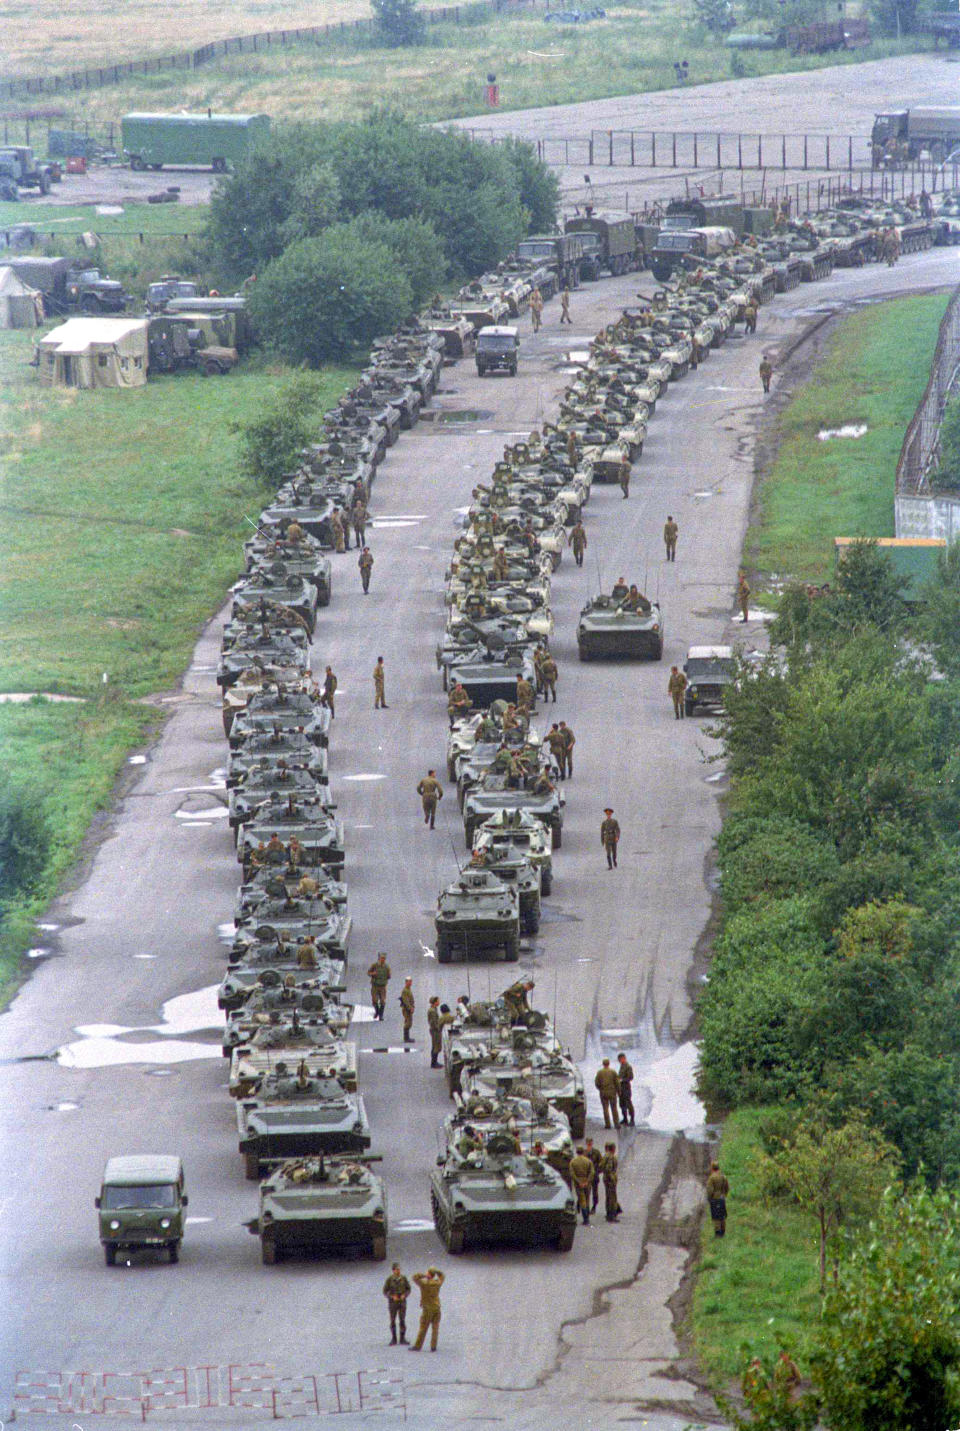 FILE - In this Tuesday, Aug. 20, 1991 file photo, a convoy of Soviet tanks holds its position near Moscow's central airfield less than two miles from the Kremlin, Russia. When a group of top Communist officials ousted Soviet leader Mikhail Gorbachev 30 years ago and flooded Moscow with tanks, the world held its breath, fearing a rollback on liberal reforms and a return to the Cold War confrontation. But the August 1991 coup collapsed in just three days, precipitating the breakup of the Soviet Union that plotters said they were trying to prevent. (AP Photo/Boris Yurchenko, File)